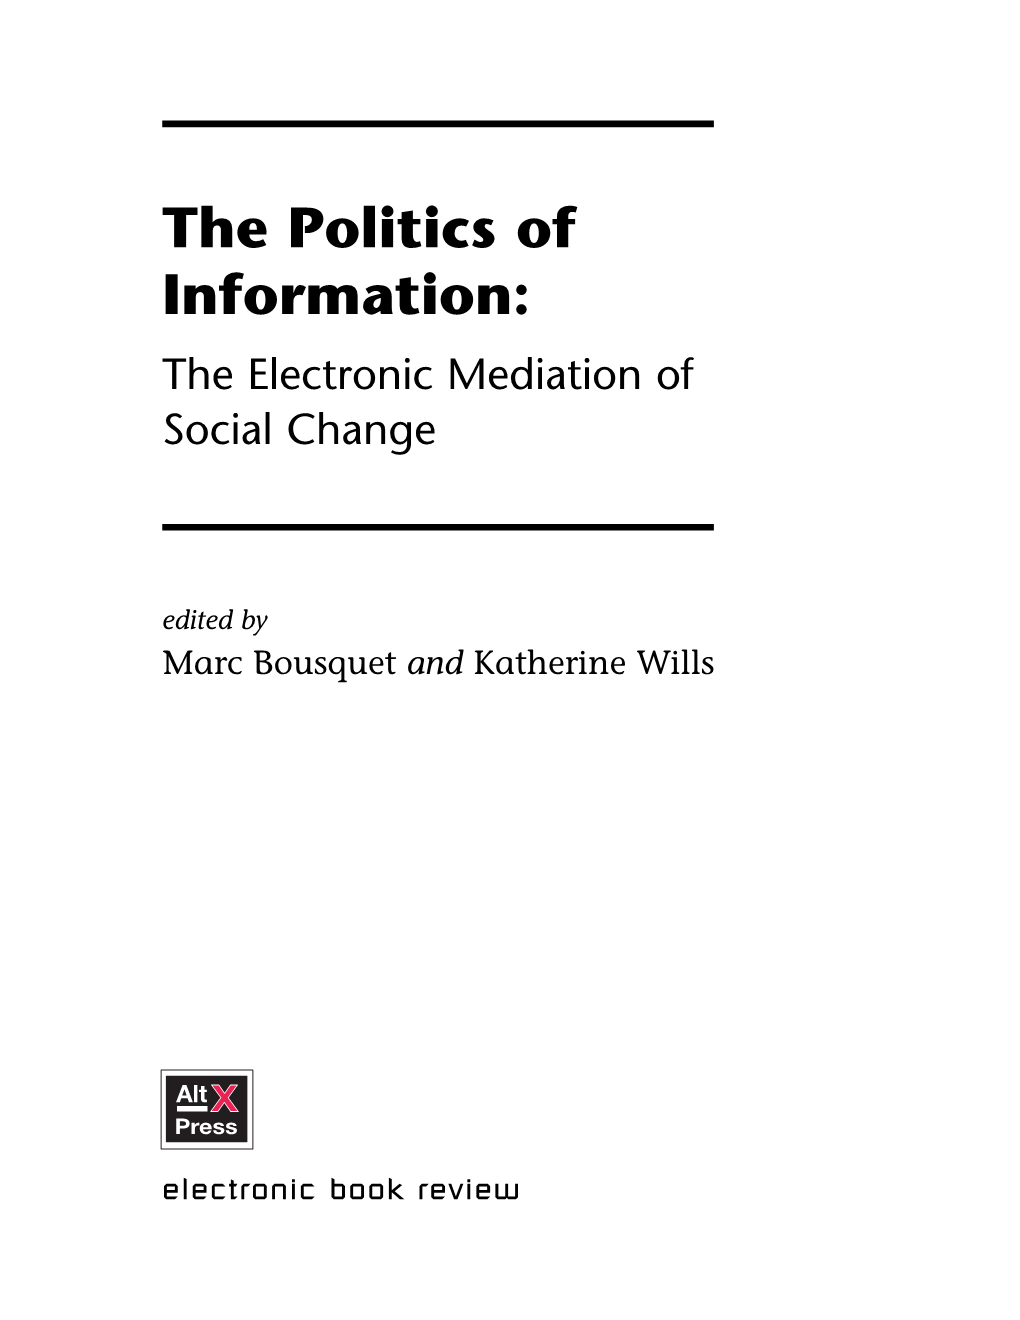 The Politics of Information: the Electronic Mediation of Social Change